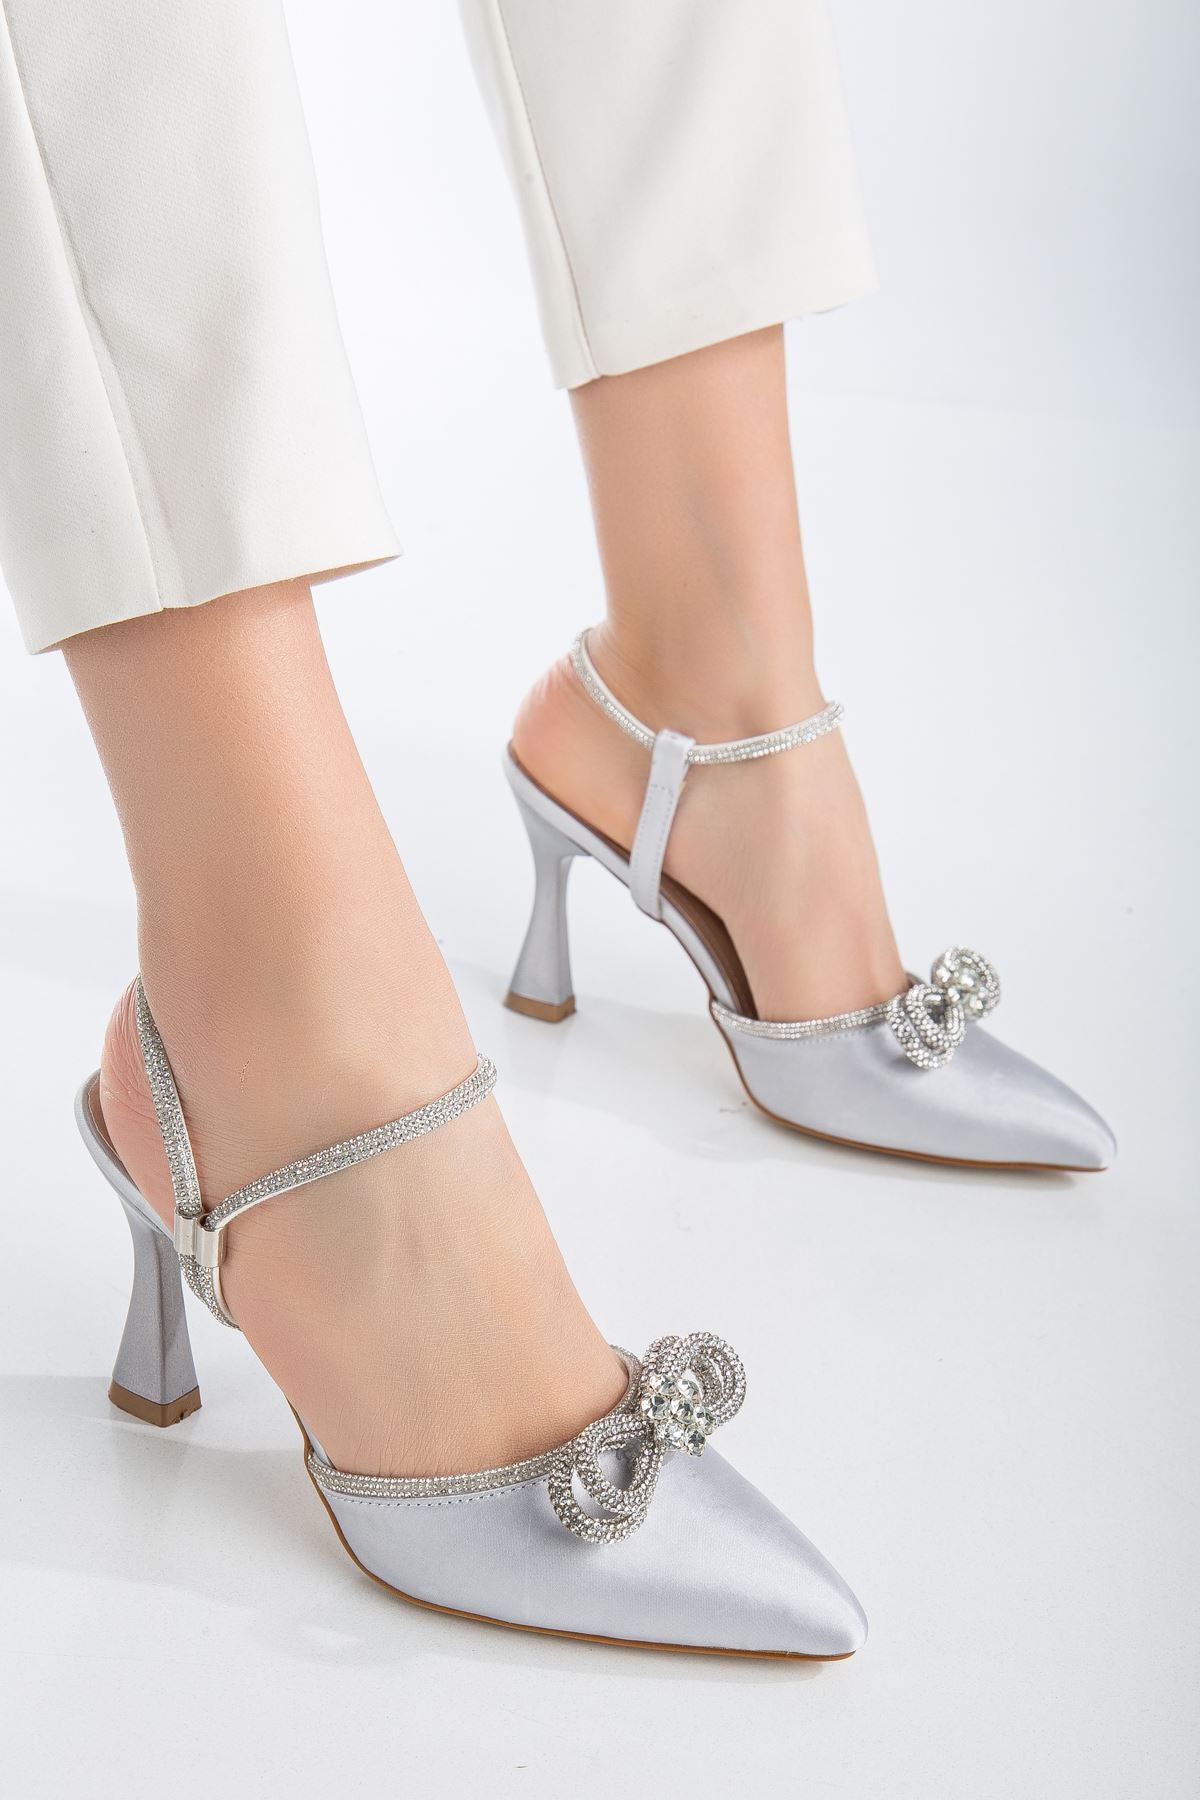 Women's Wilma Silver Satin Stoned Bow Detailed Pointed Toe Heeled Shoes - STREETMODE ™